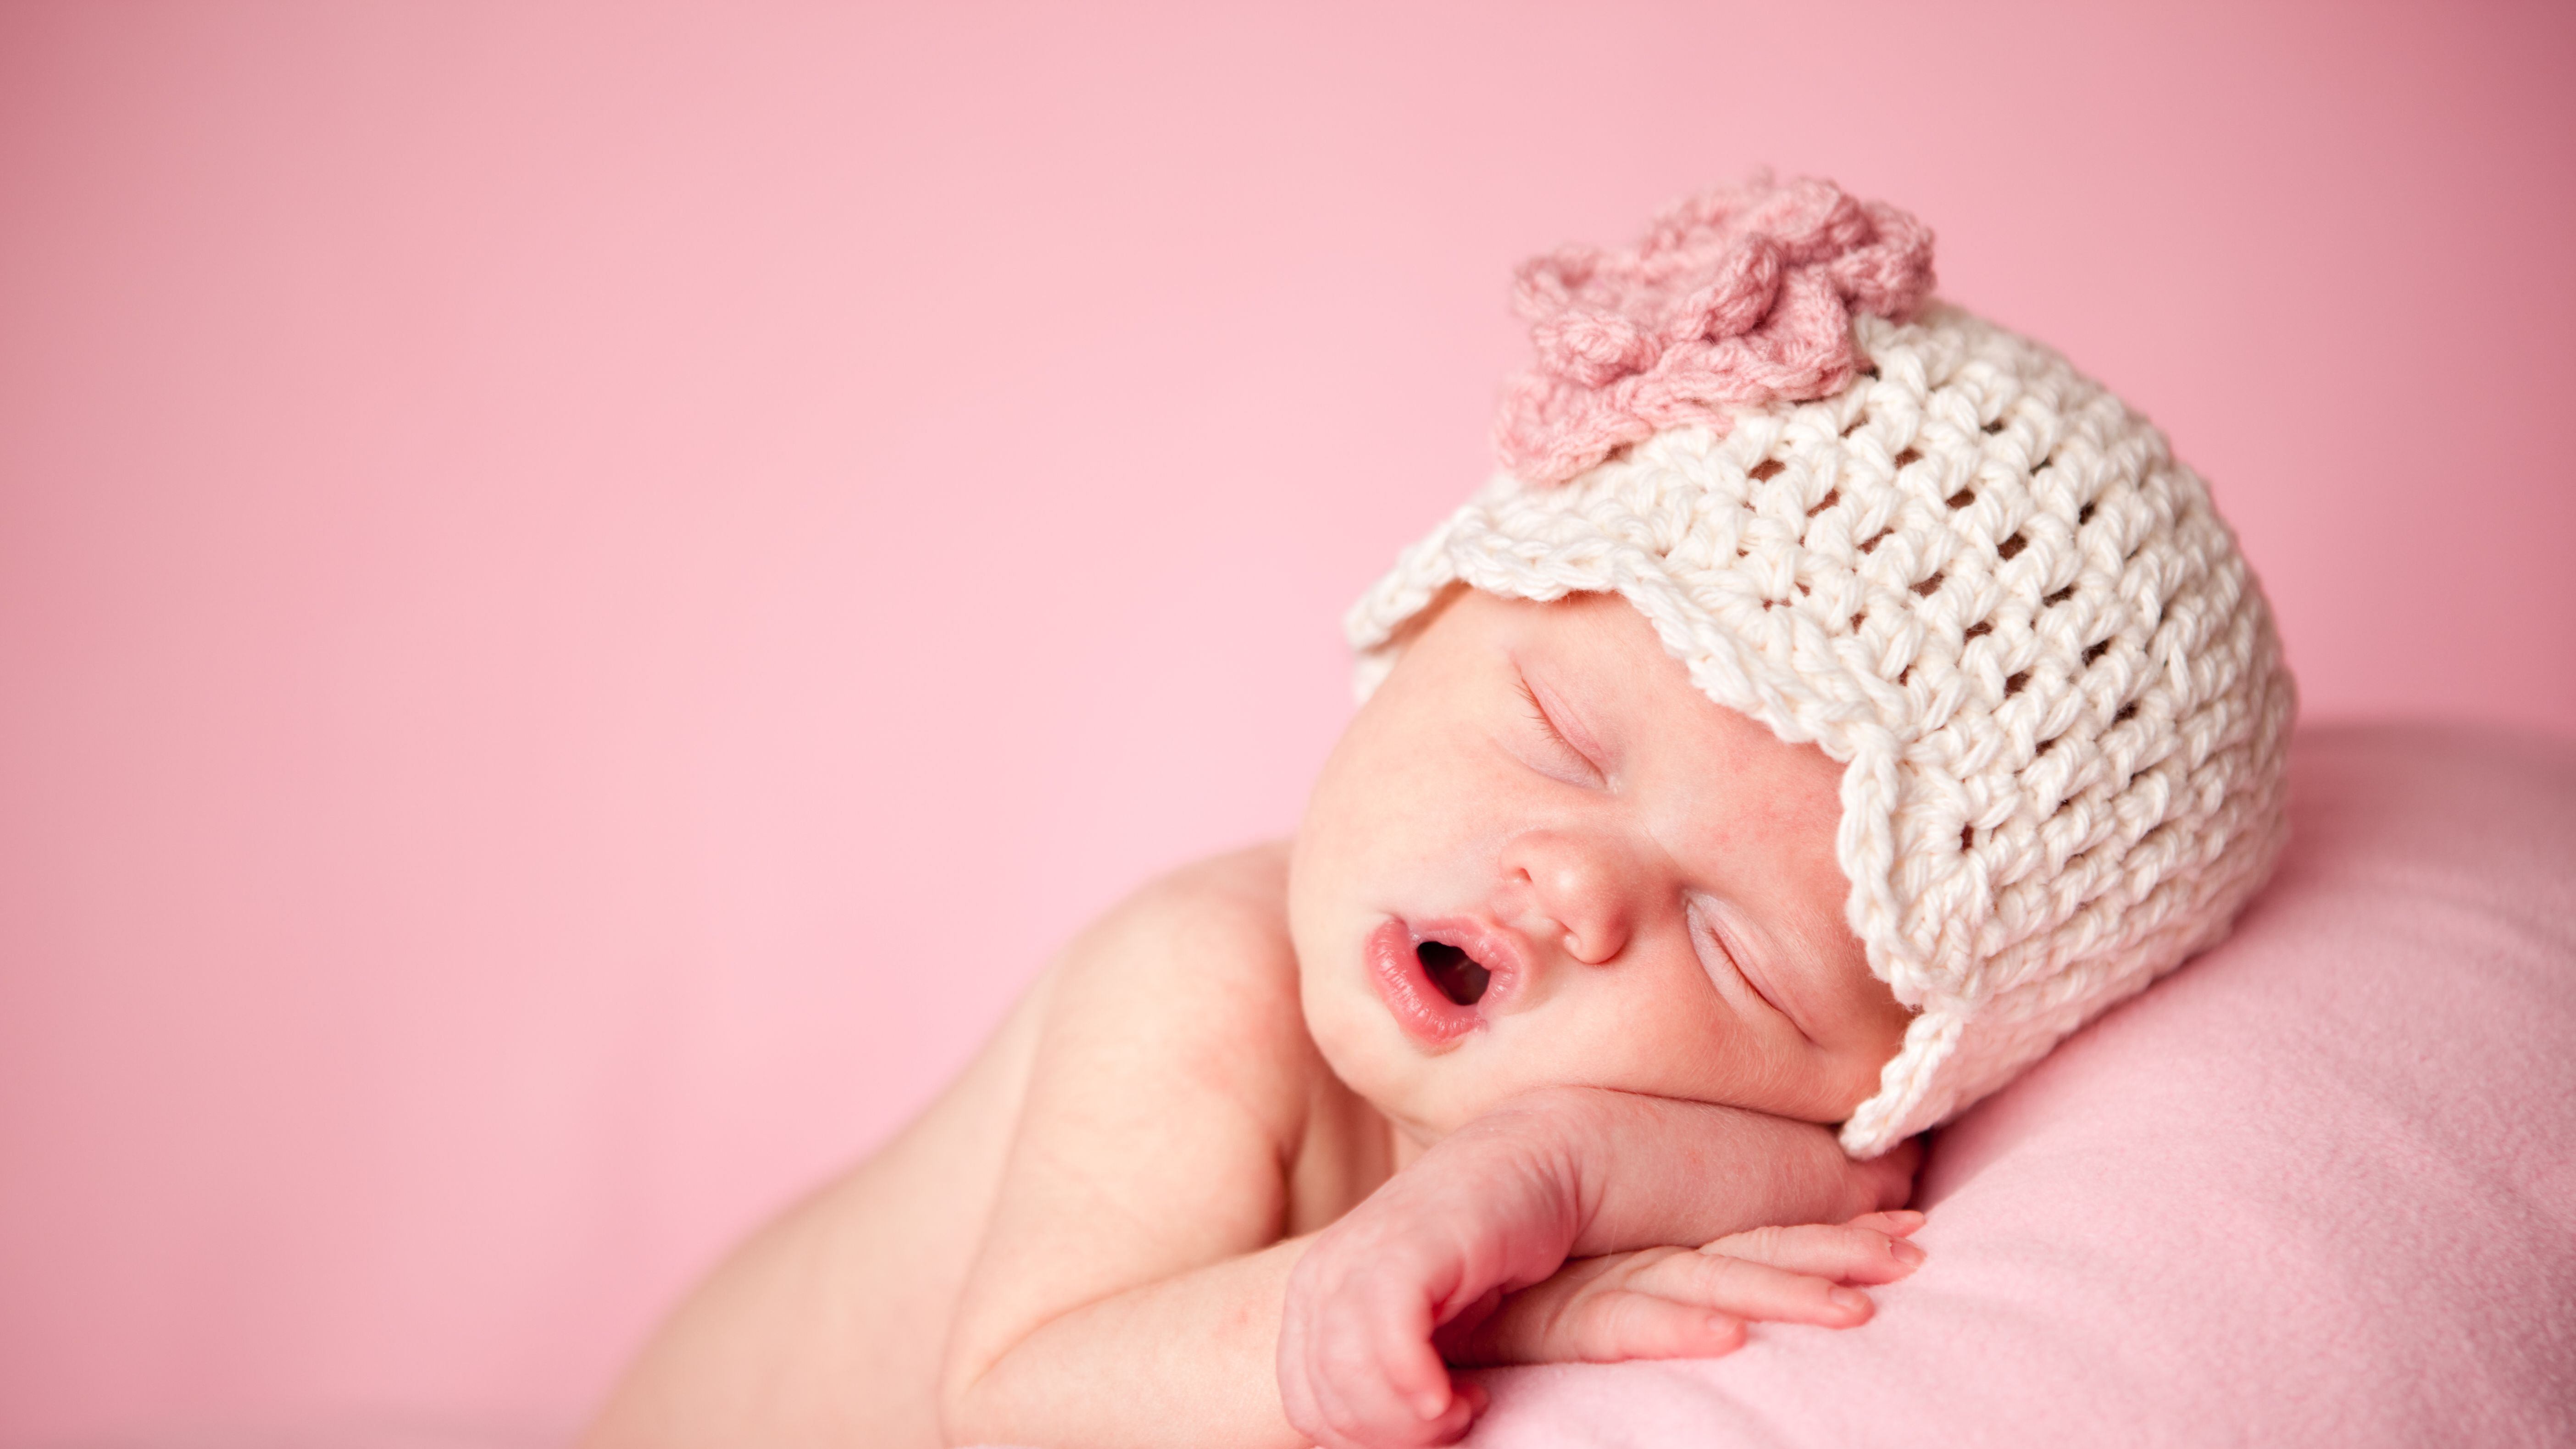 https://hips.hearstapps.com/hmg-prod/images/sleeping-newborn-baby-girl-wearing-a-crocheted-hat-royalty-free-image-1588778454.jpg?crop=1xw:0.84375xh;center,top